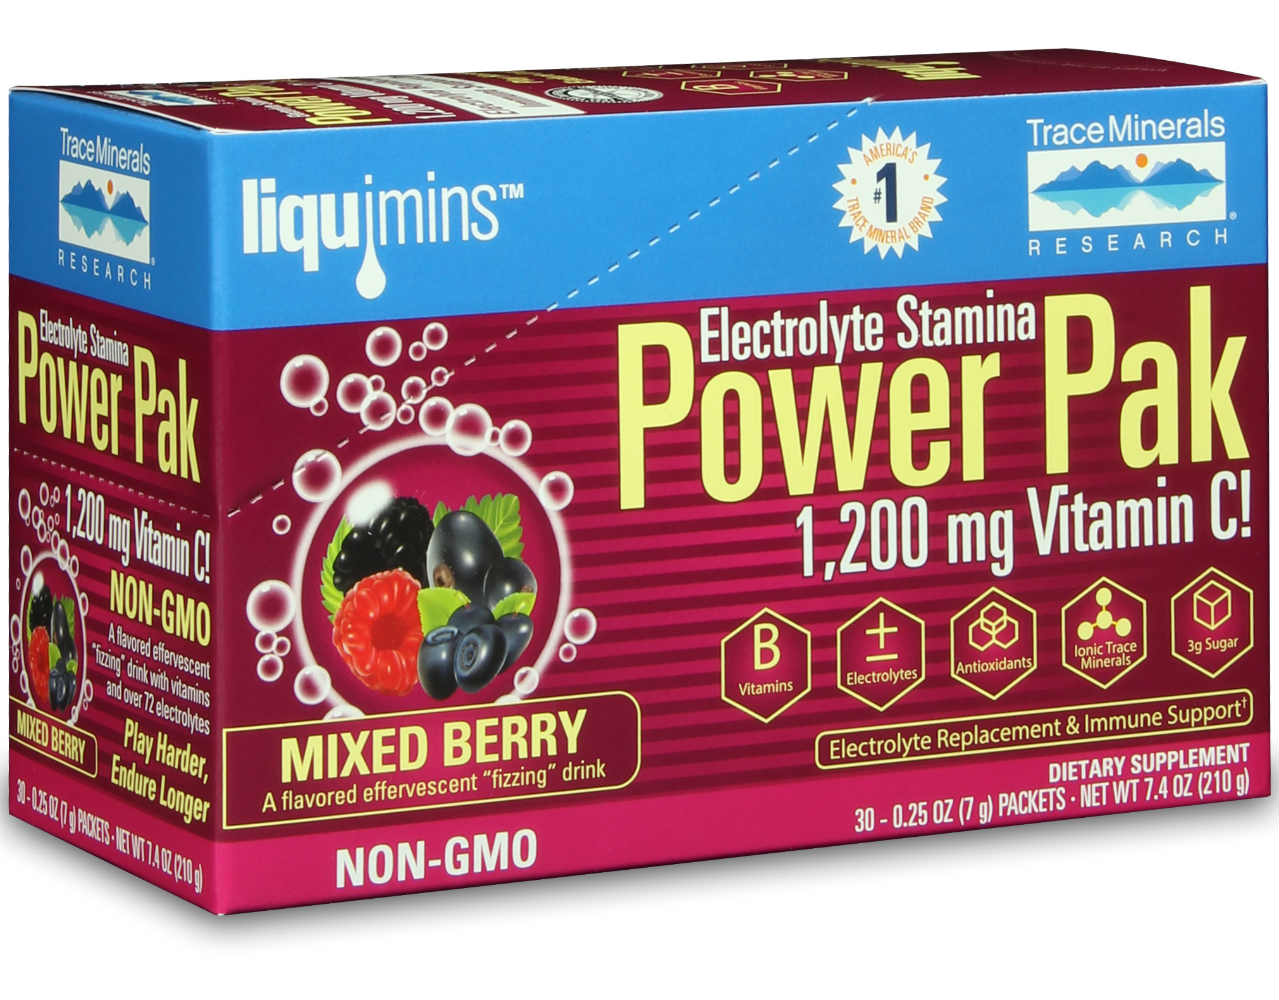 Trace Minerals Research: Electrolyte Stamina Power Pak Non-GMO Mixed Berry 30 packets